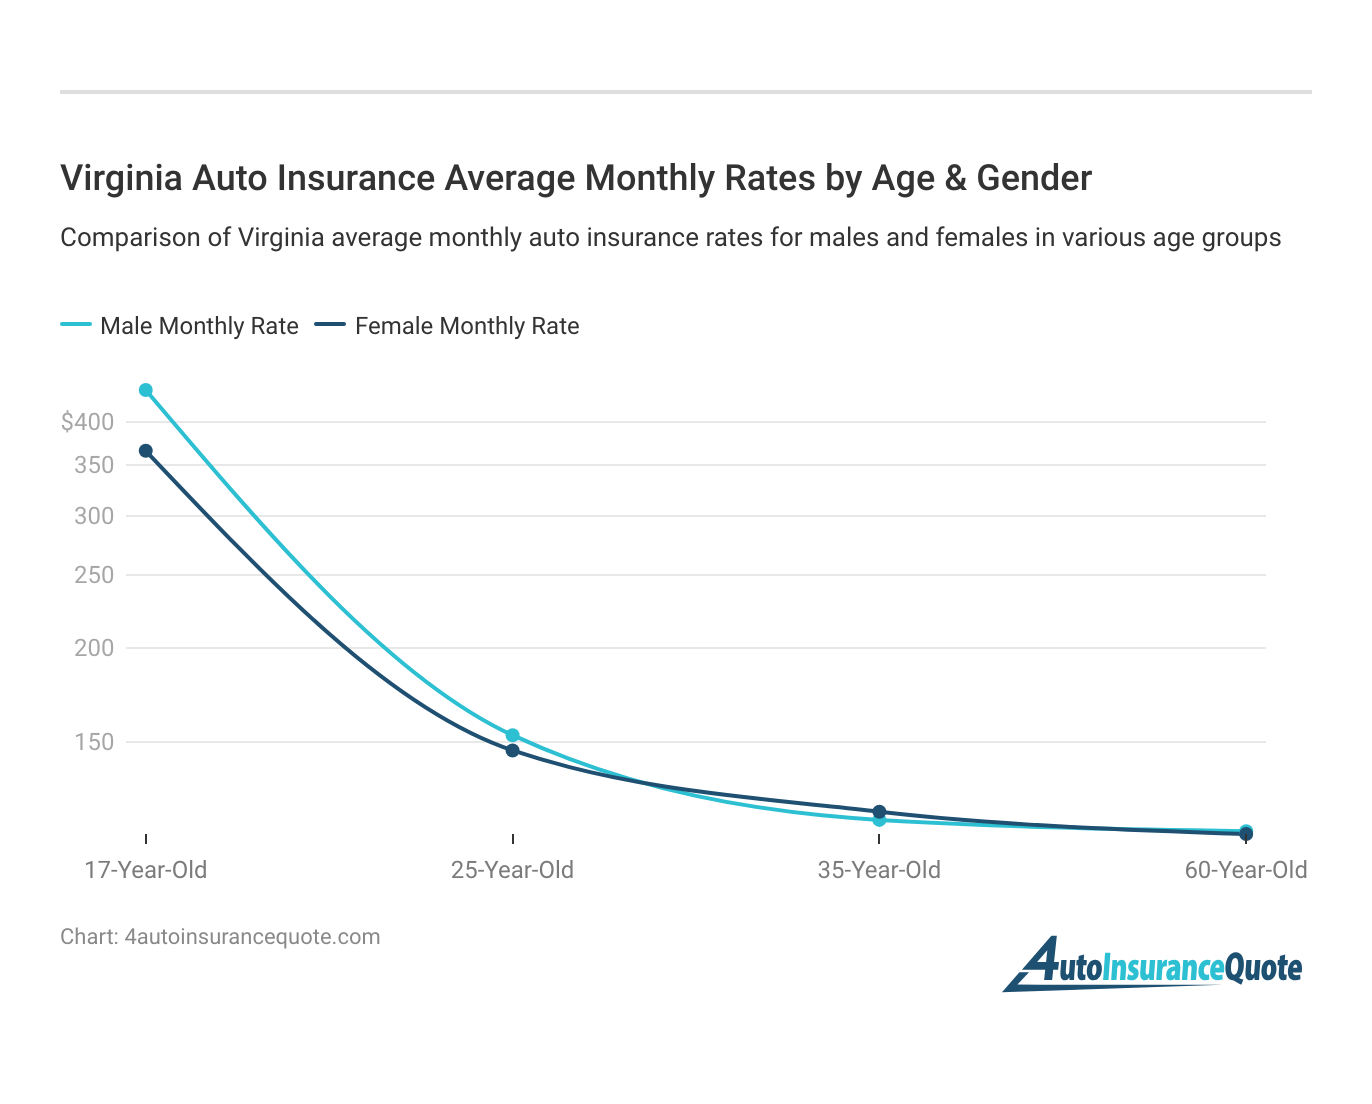 <h3>Virginia Auto Insurance Average Monthly Rates by Age & Gender</h3>